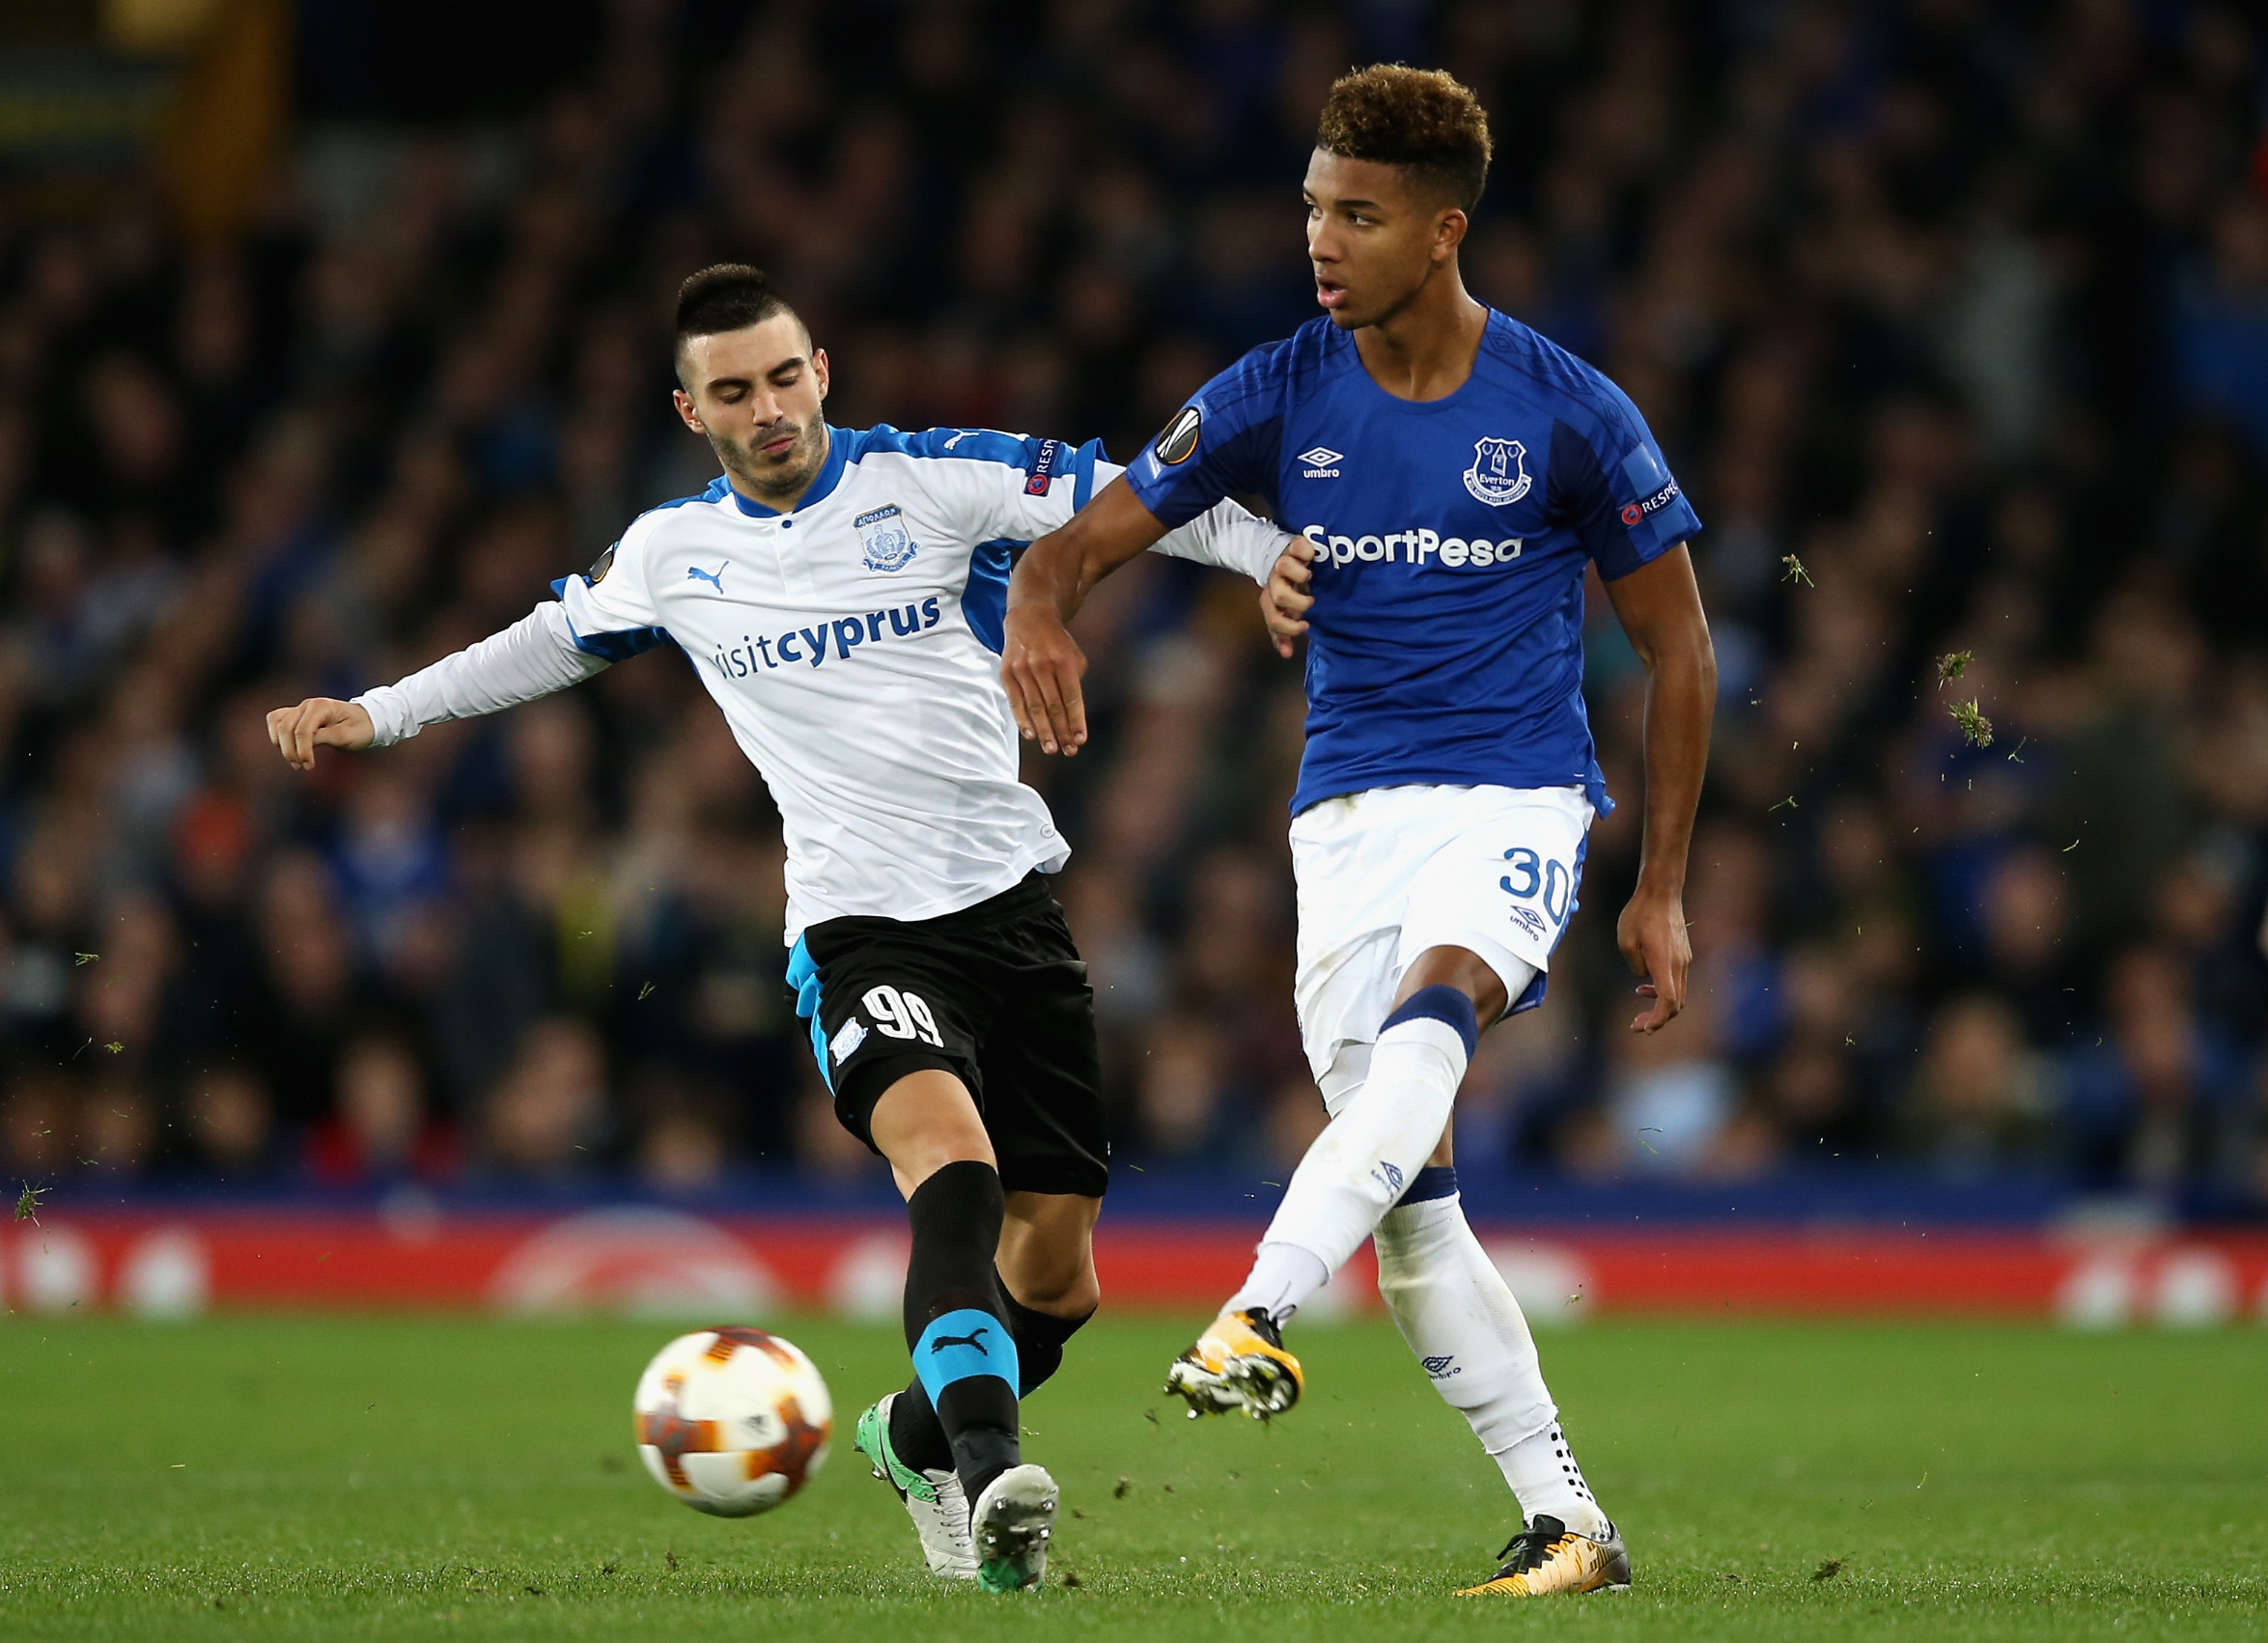 LIVERPOOL, ENGLAND - SEPTEMBER 28:  Mason Holgate of Everton and Anton Maglica of Apollon Limassol in action during the UEFA Europa League group E match between Everton FC and Apollon Limassol at Goodison Park on September 28, 2017 in Liverpool, United Kingdom.  (Photo by Jan Kruger/Getty Images)